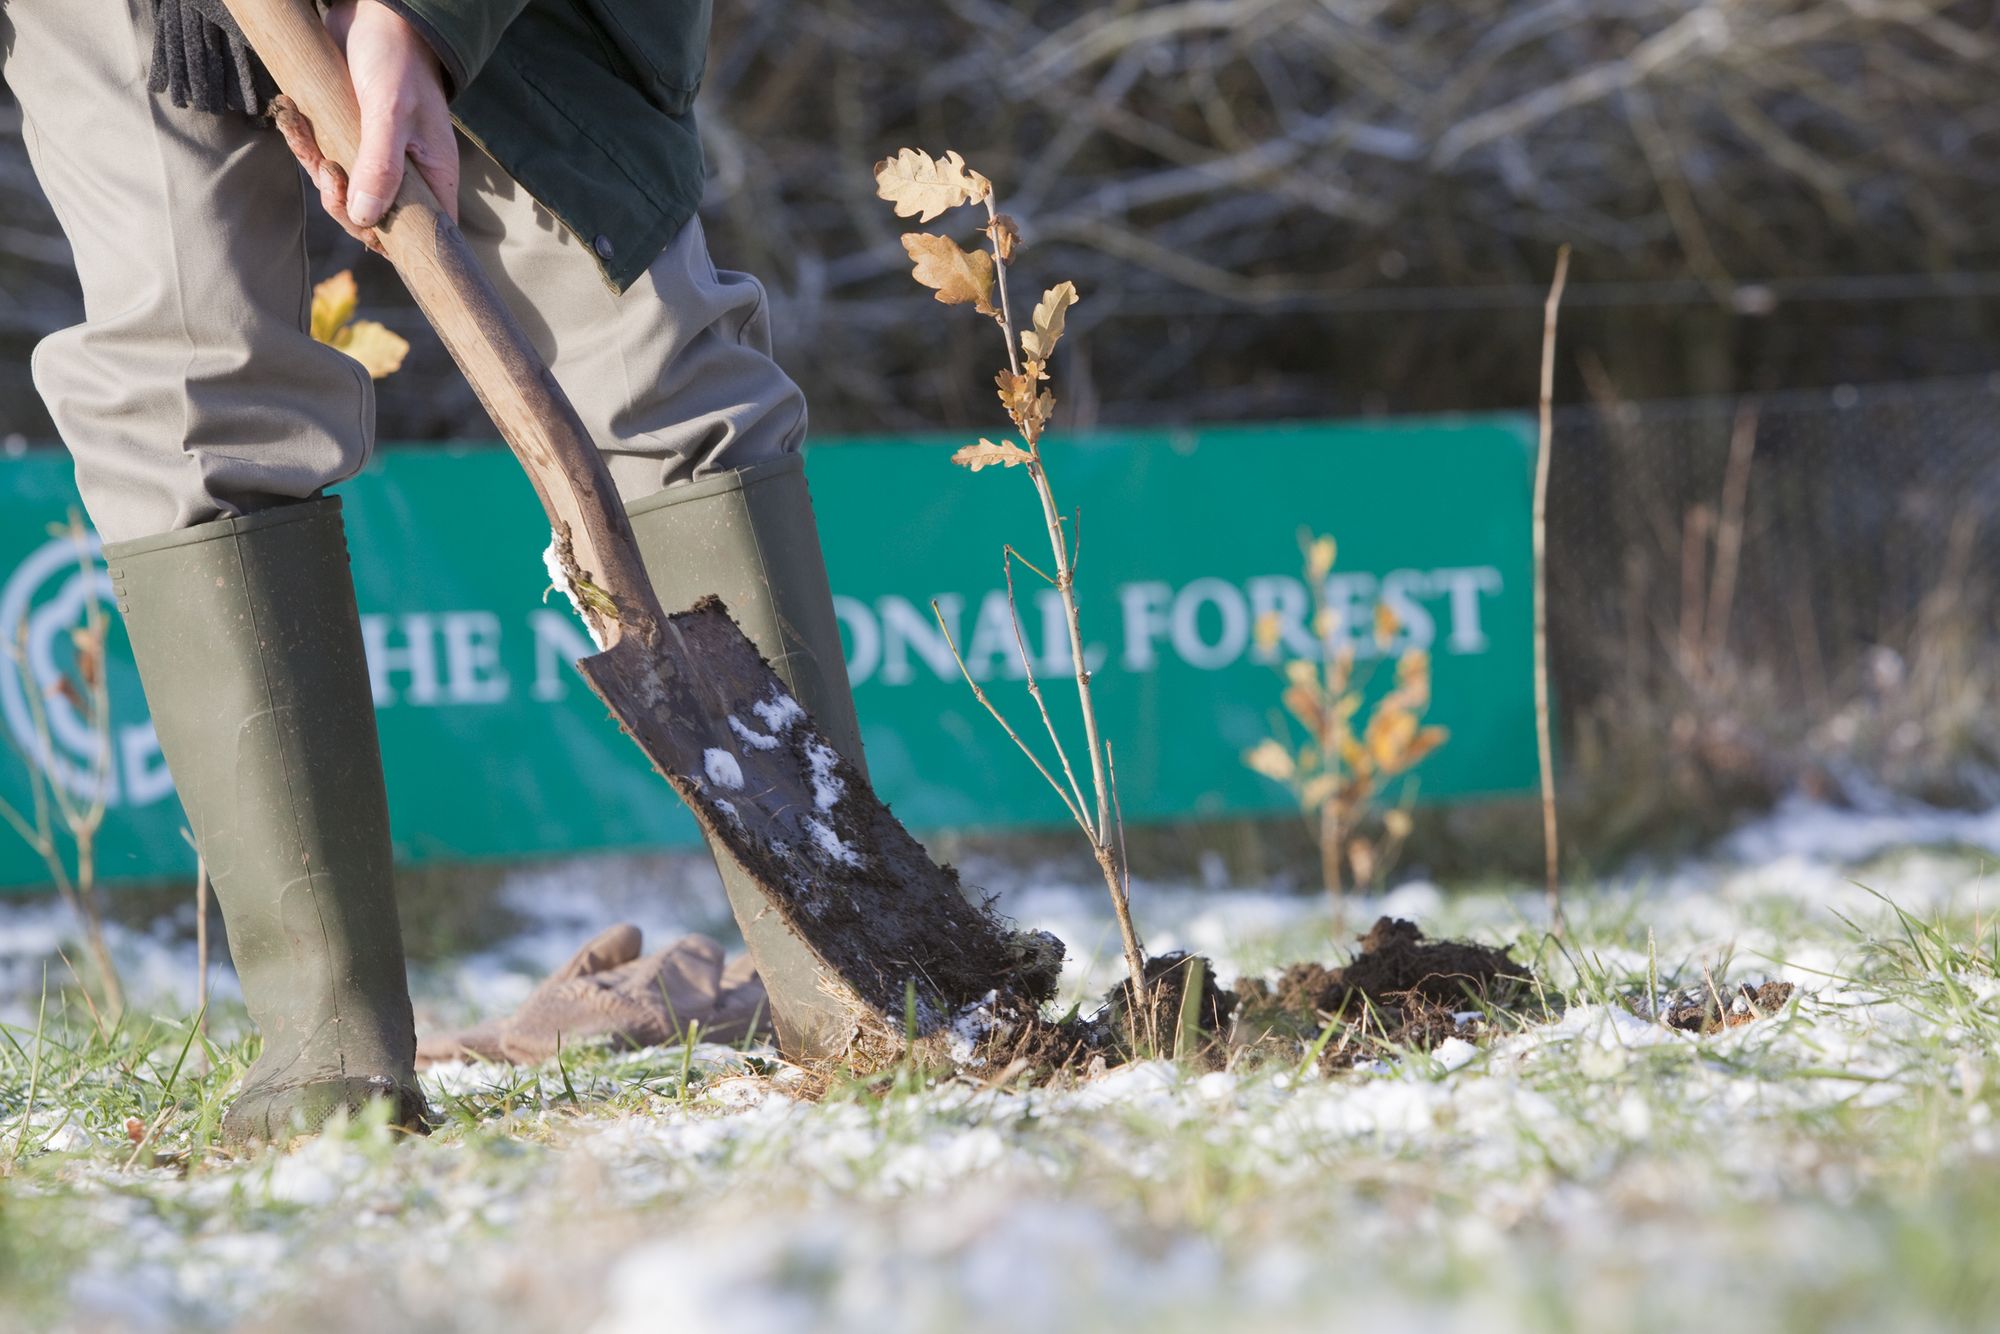 Central England Co-op members to help create new woodland in the National Forest